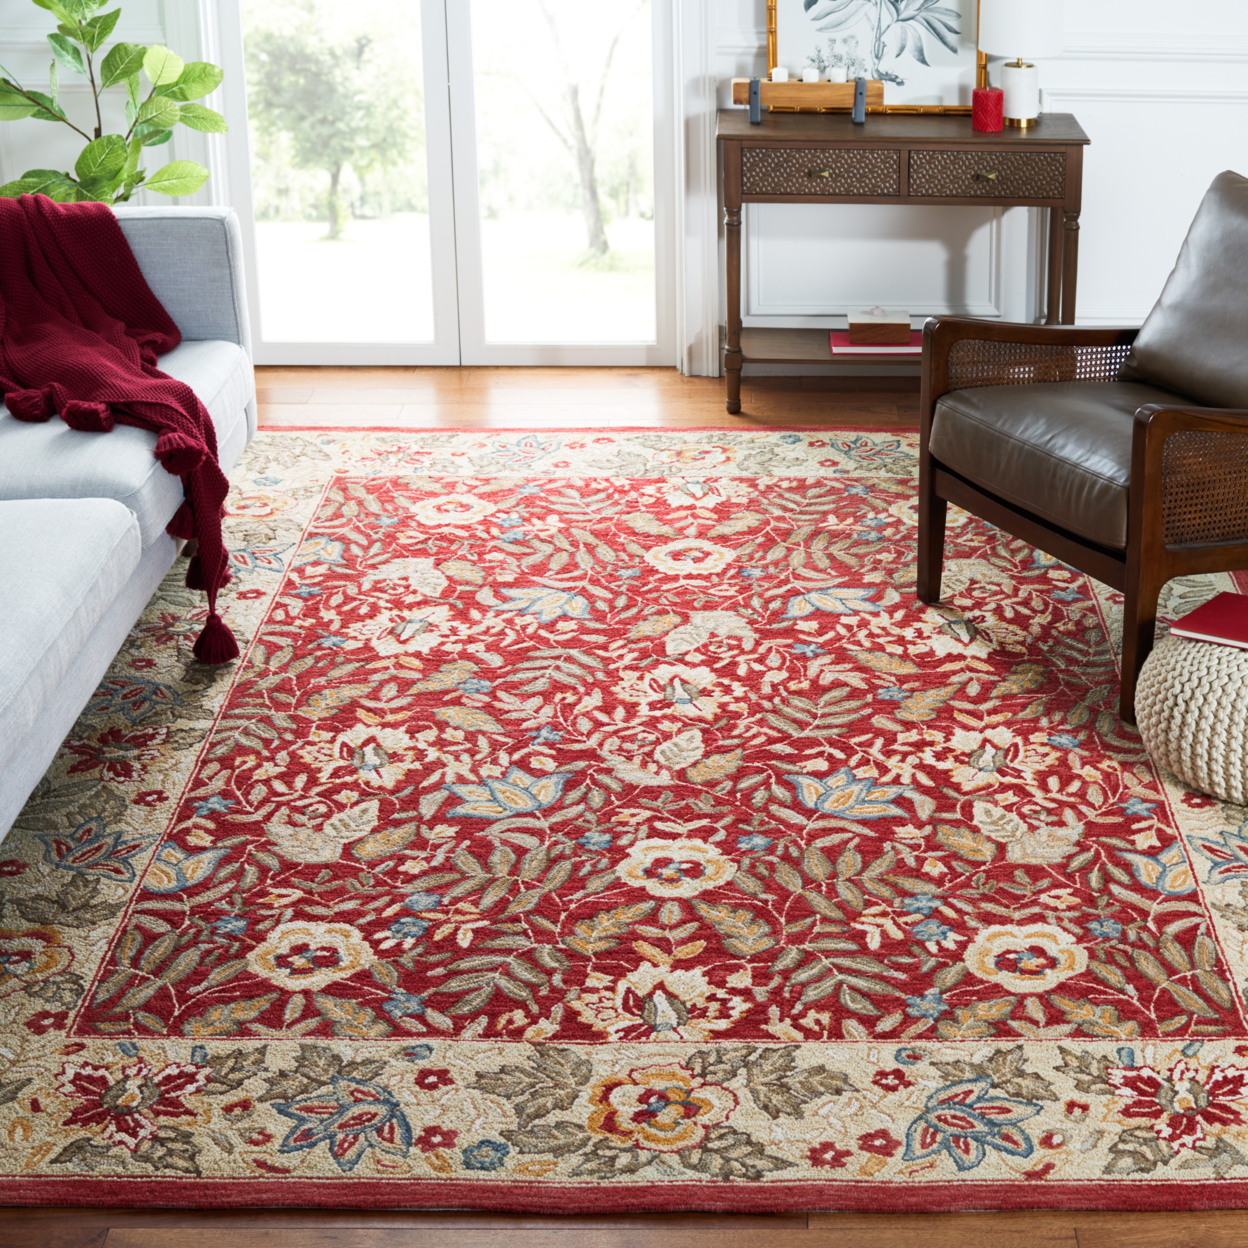 SAFAVIEH Chelsea HK140C Hand-hooked Red / Ivory Rug - 8' Square